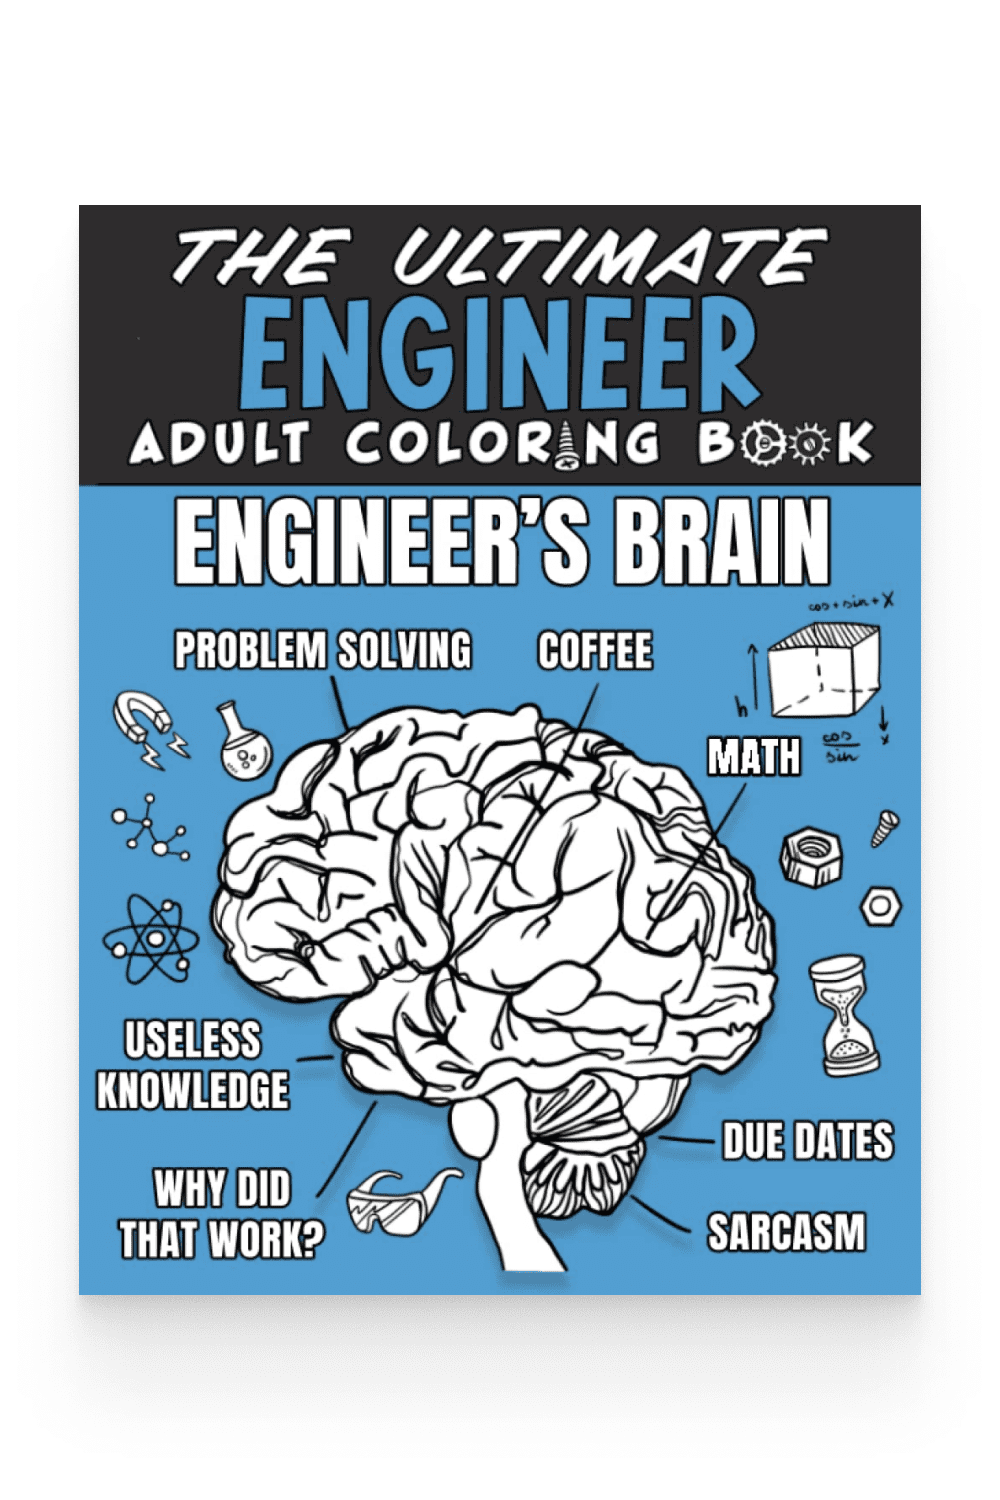 image of The Ultimate Engineer Adult Coloring Book.